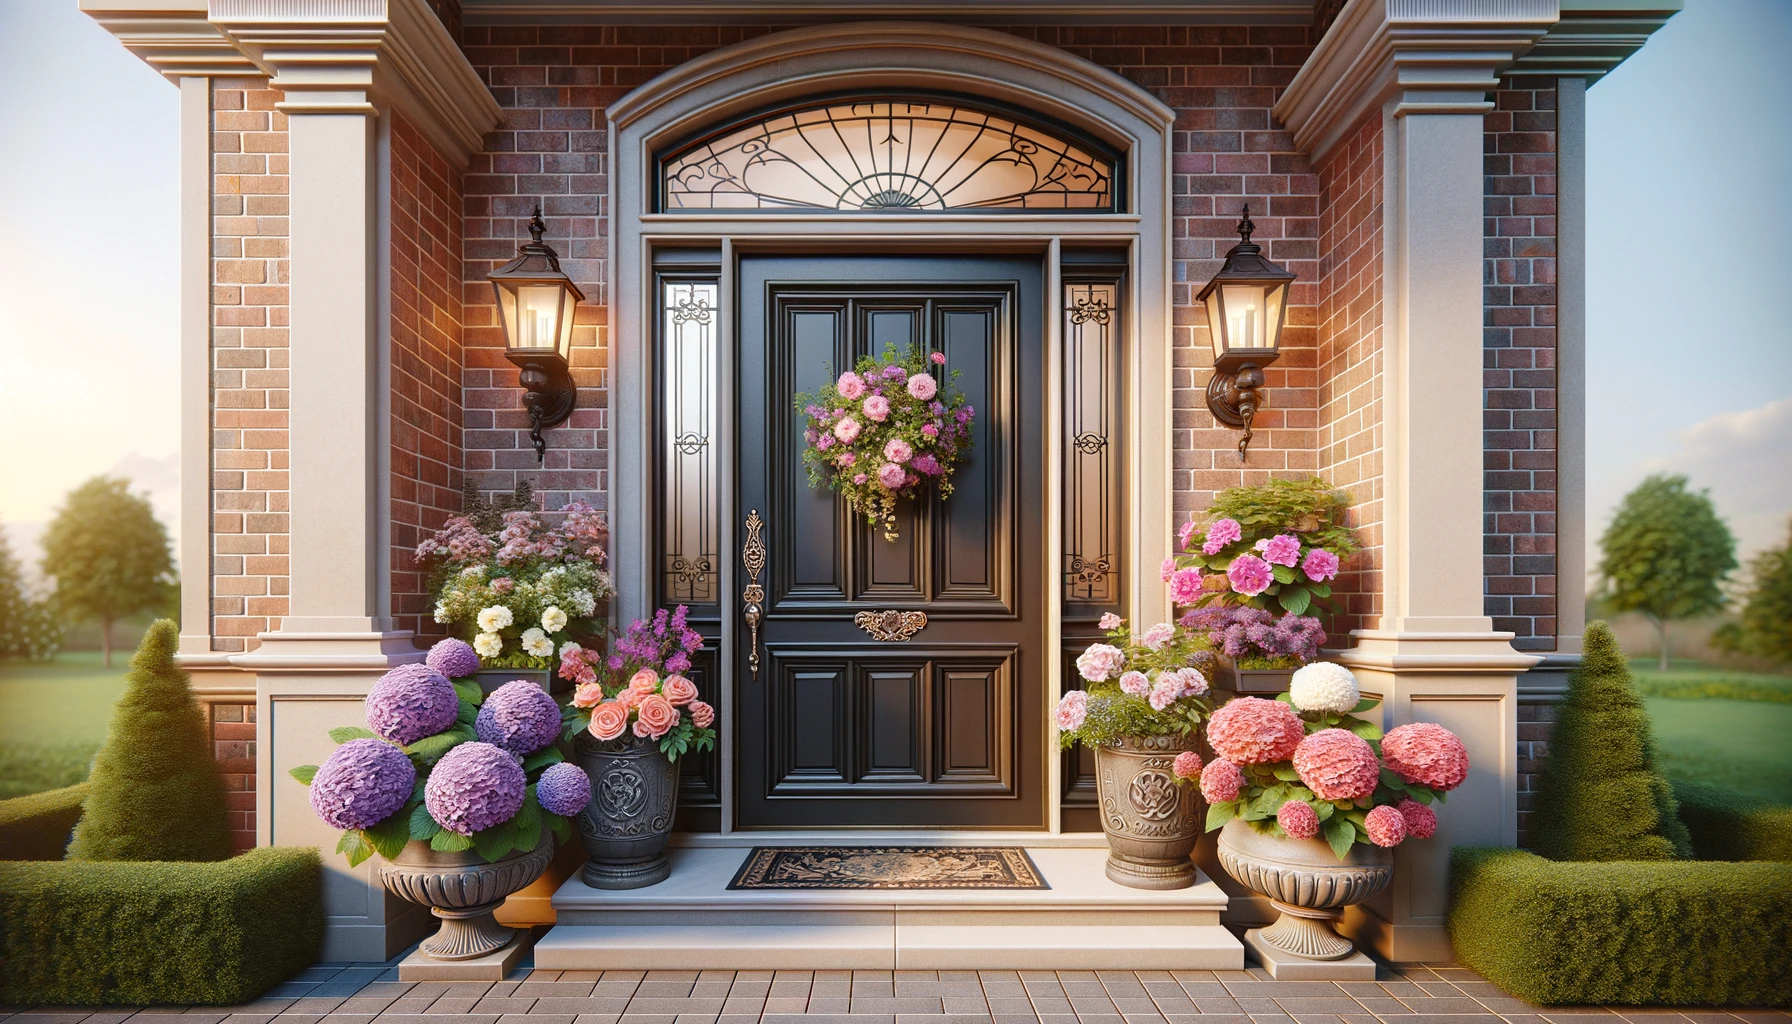 Find out which entry door is the best one for your home.